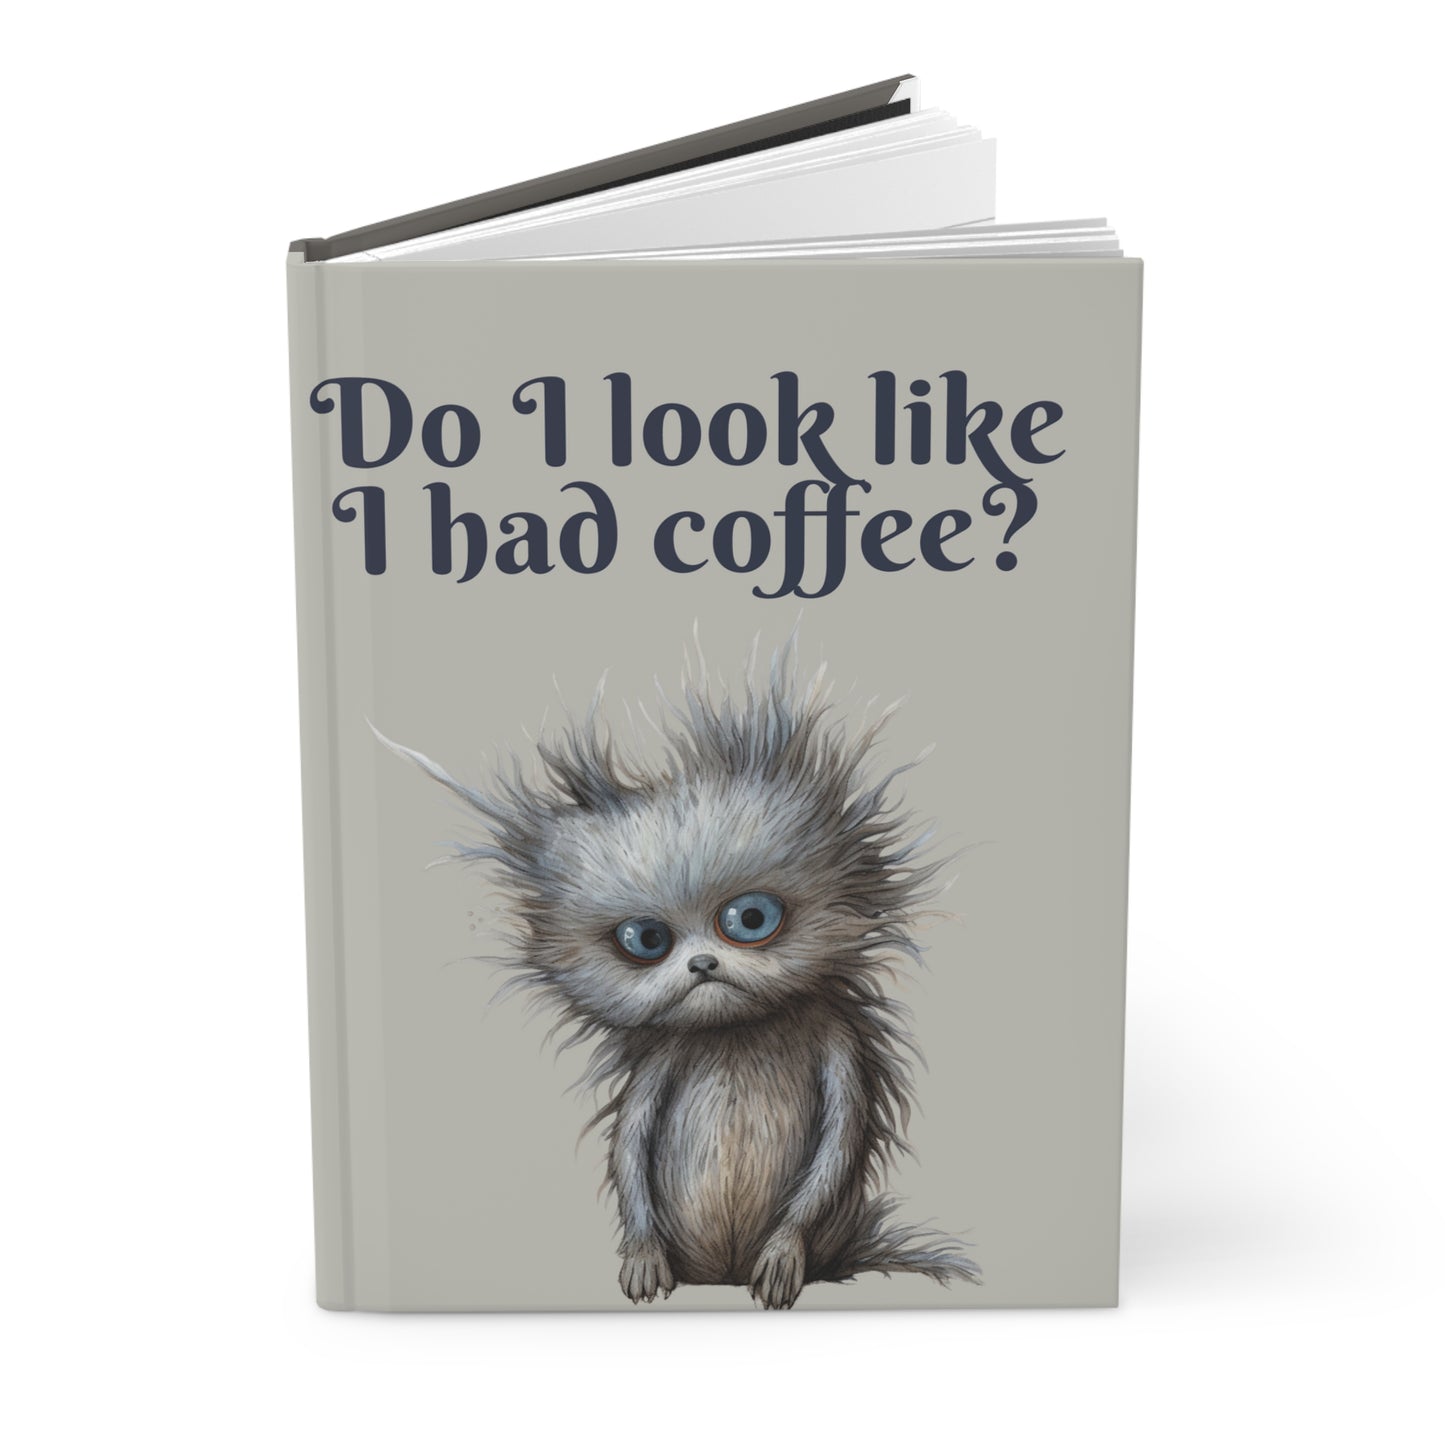 Morning Coffee Cat Hardcover Notebook Journal - Daily Planner, Gratitude, Mindfulness, Self-Care, Wellness, 5 Minutes a Day, Size 5.75"x7.5